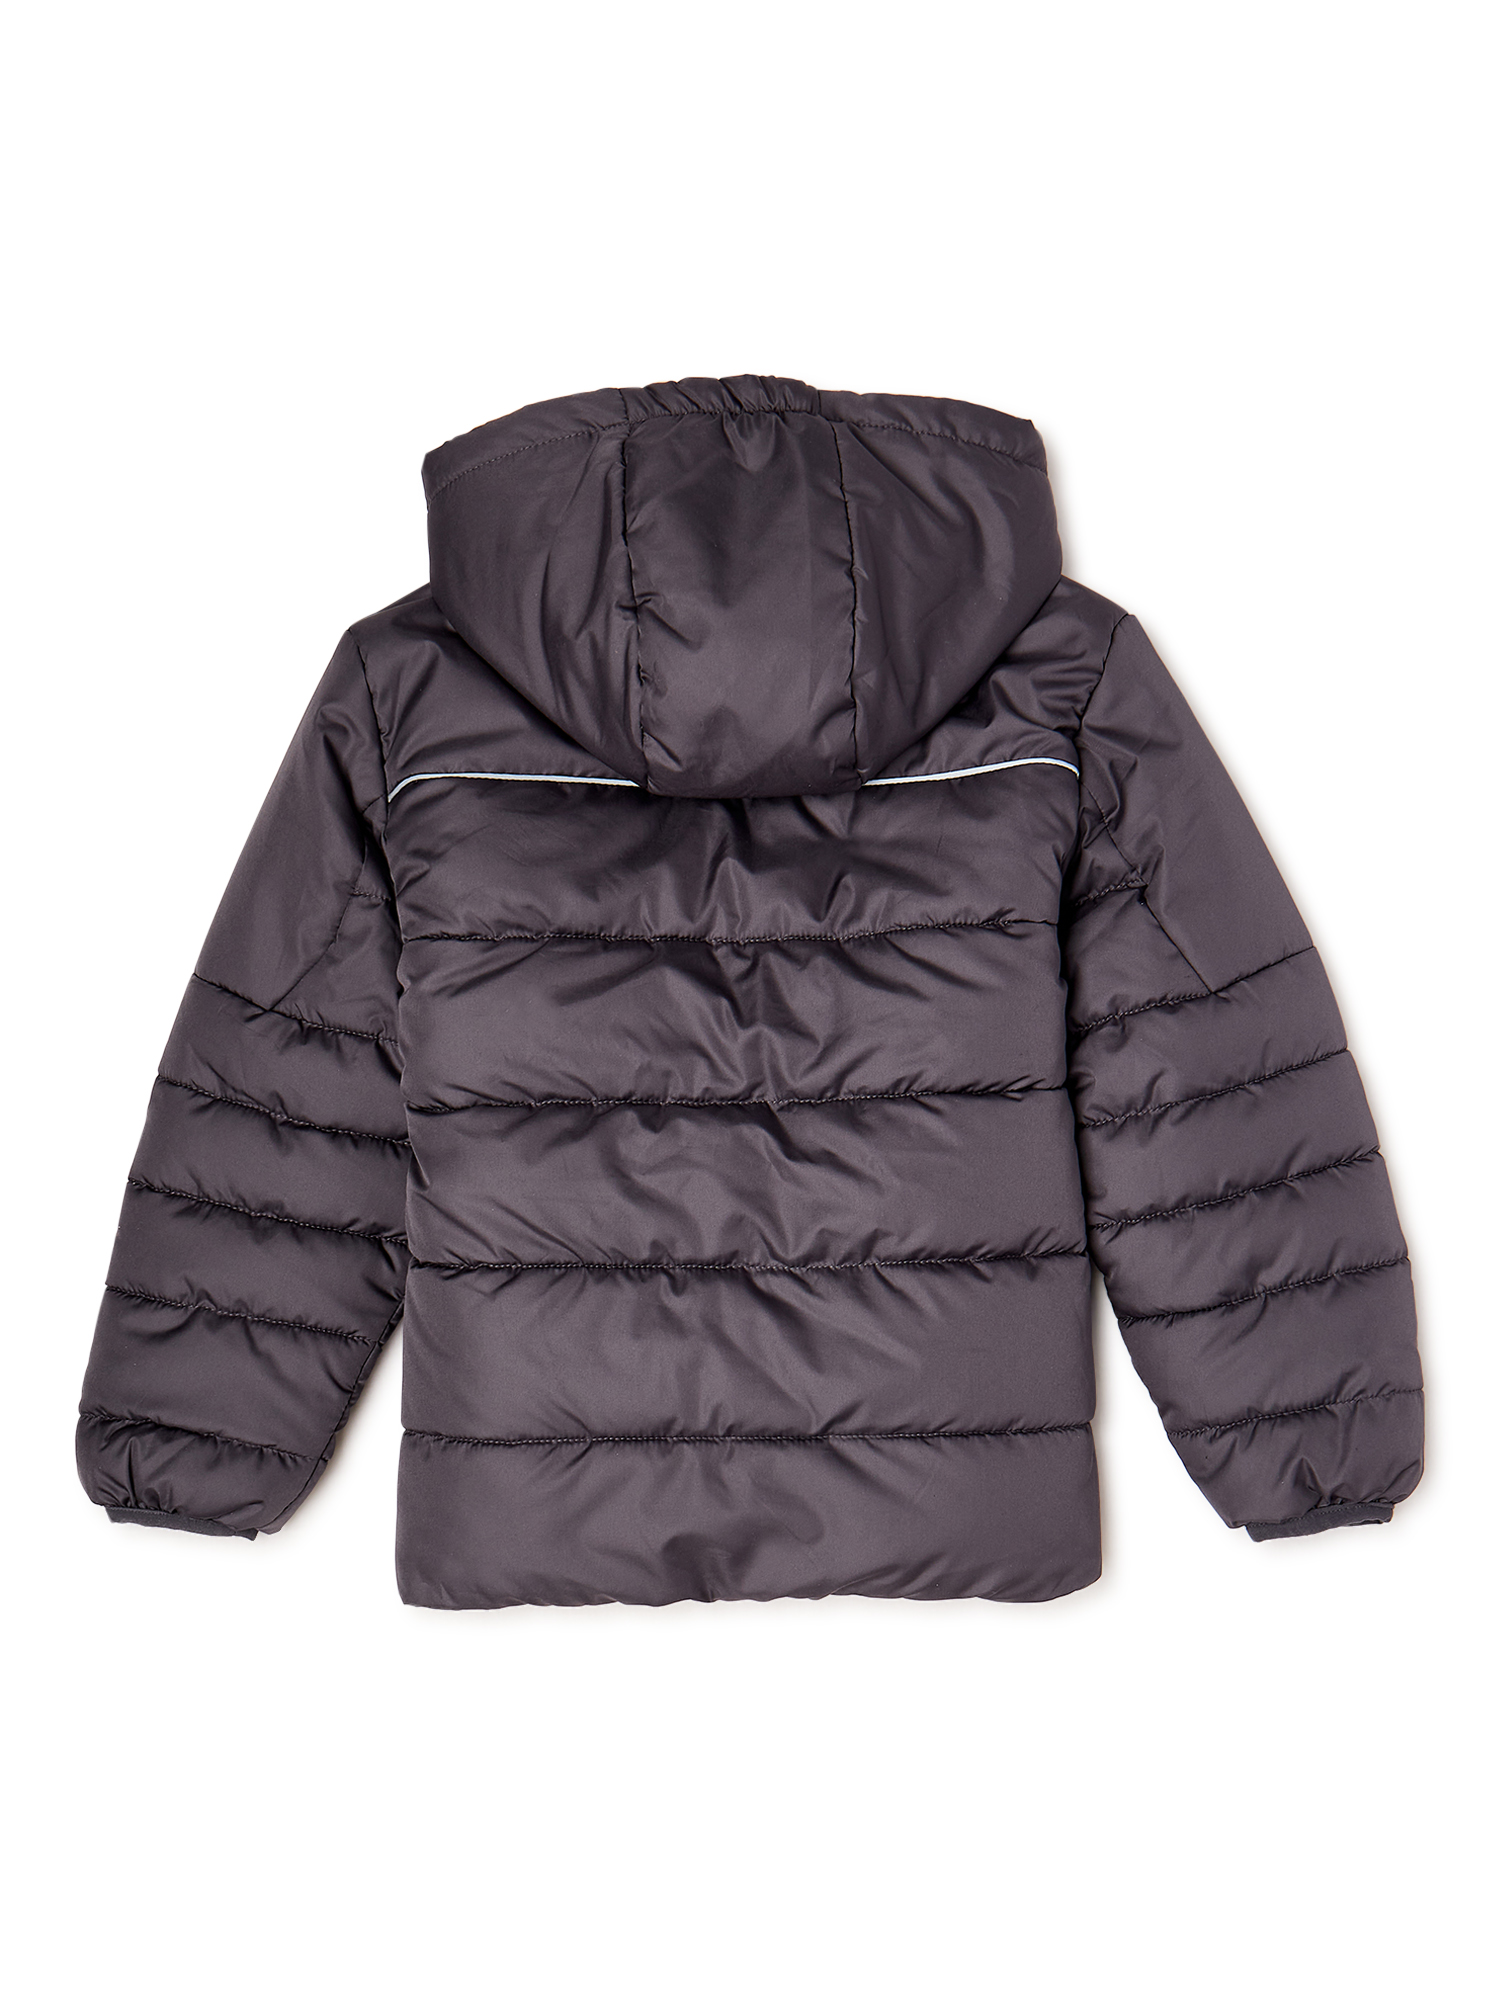 Swiss Tech Boys' Puffer Jacket with Hood, Sizes 4-18 - image 2 of 3